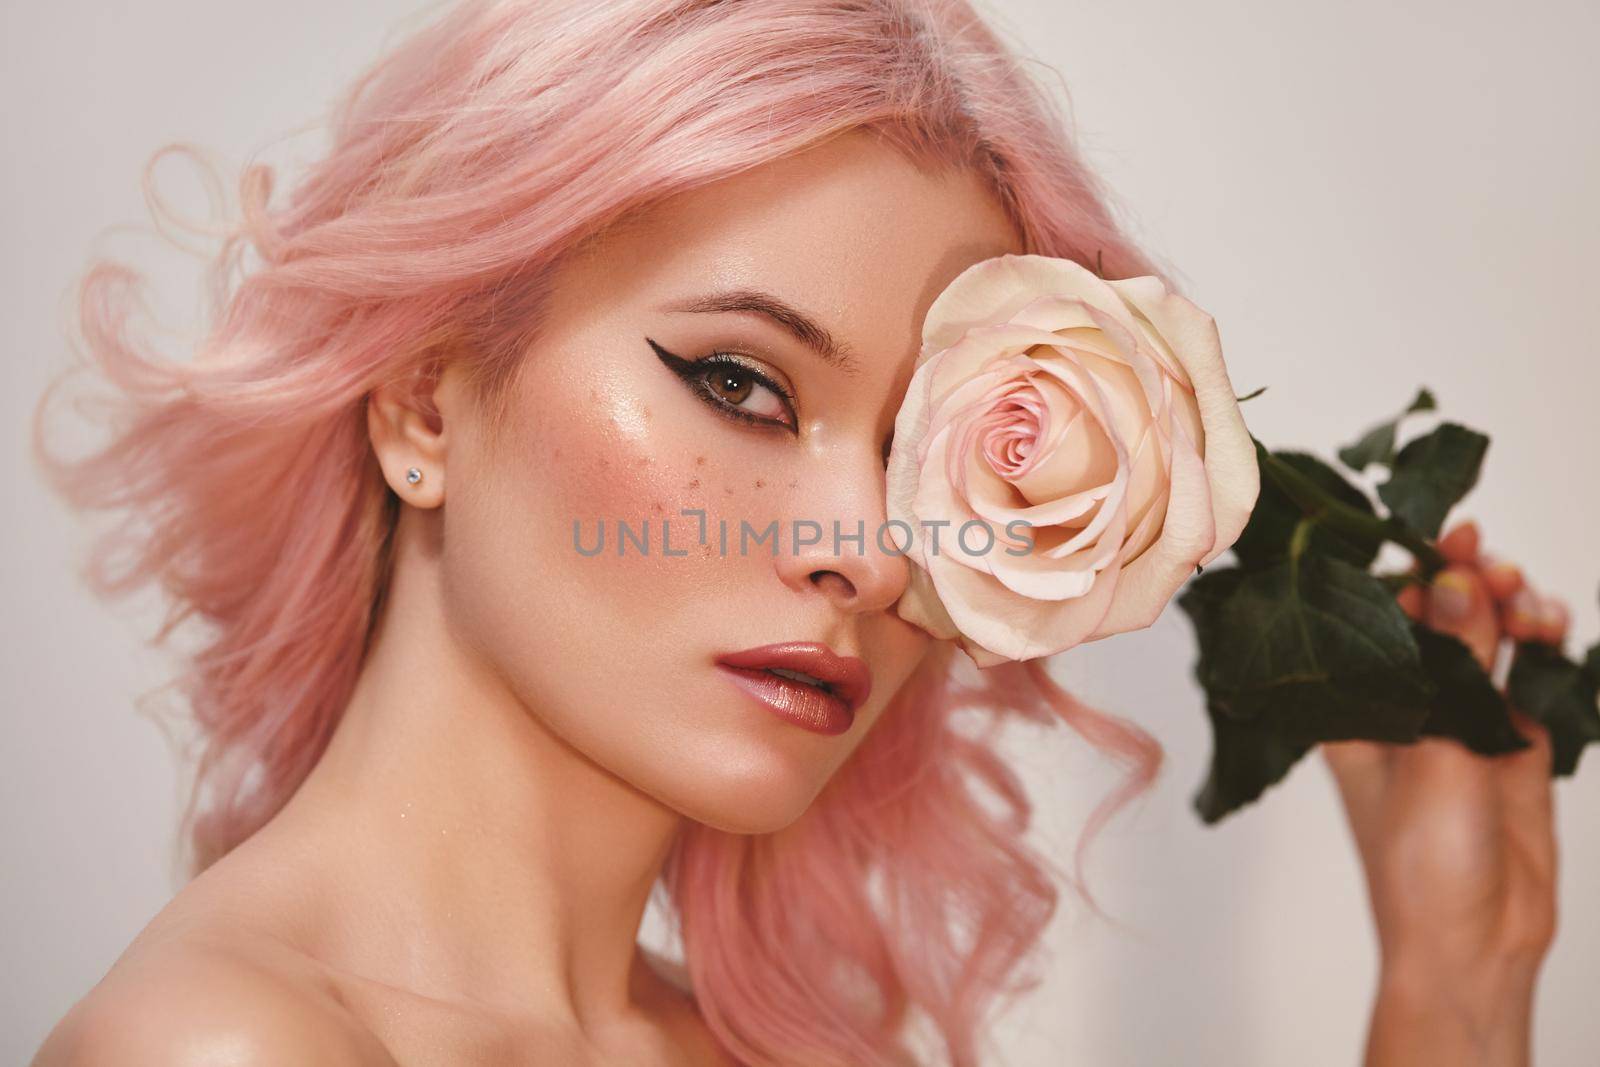 Soft-Girl Style with Trend Pink Flying Hair, Fashion Make-up. Blond Woman Face with Freckles, Blush Rouge, Rose Flowers by MarinaFrost